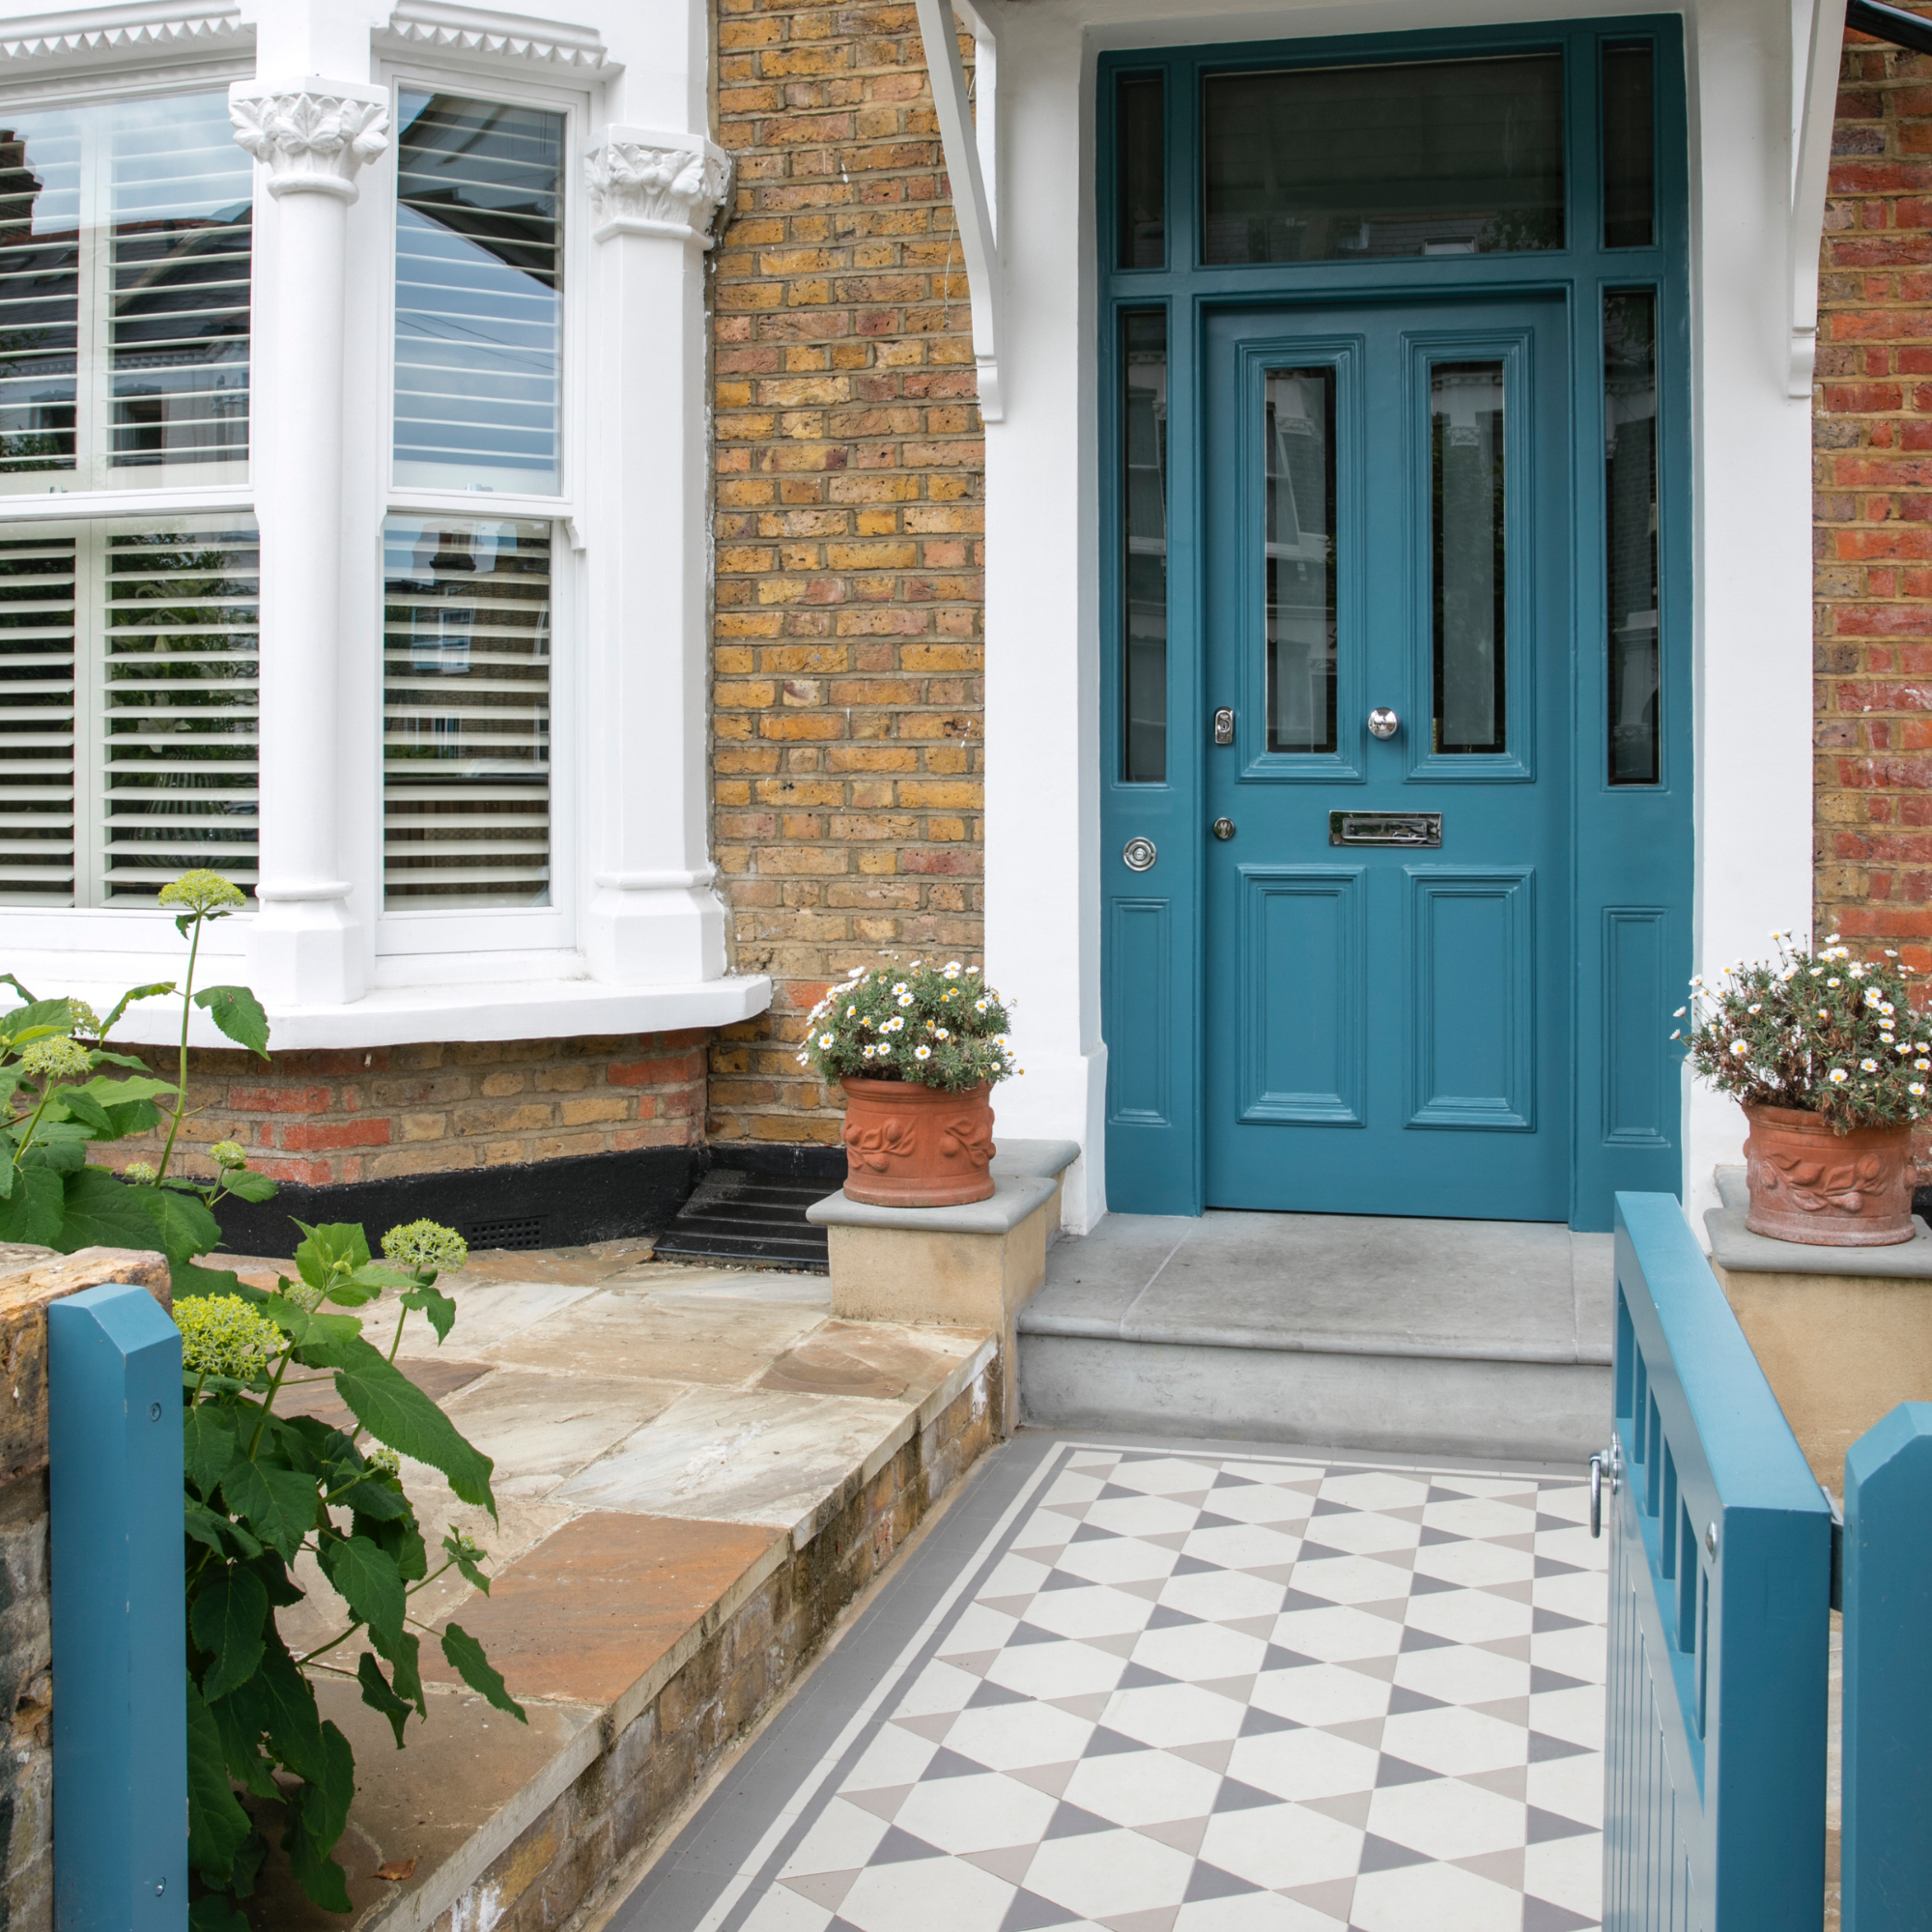 House with blue front door and gate, tiled pathway